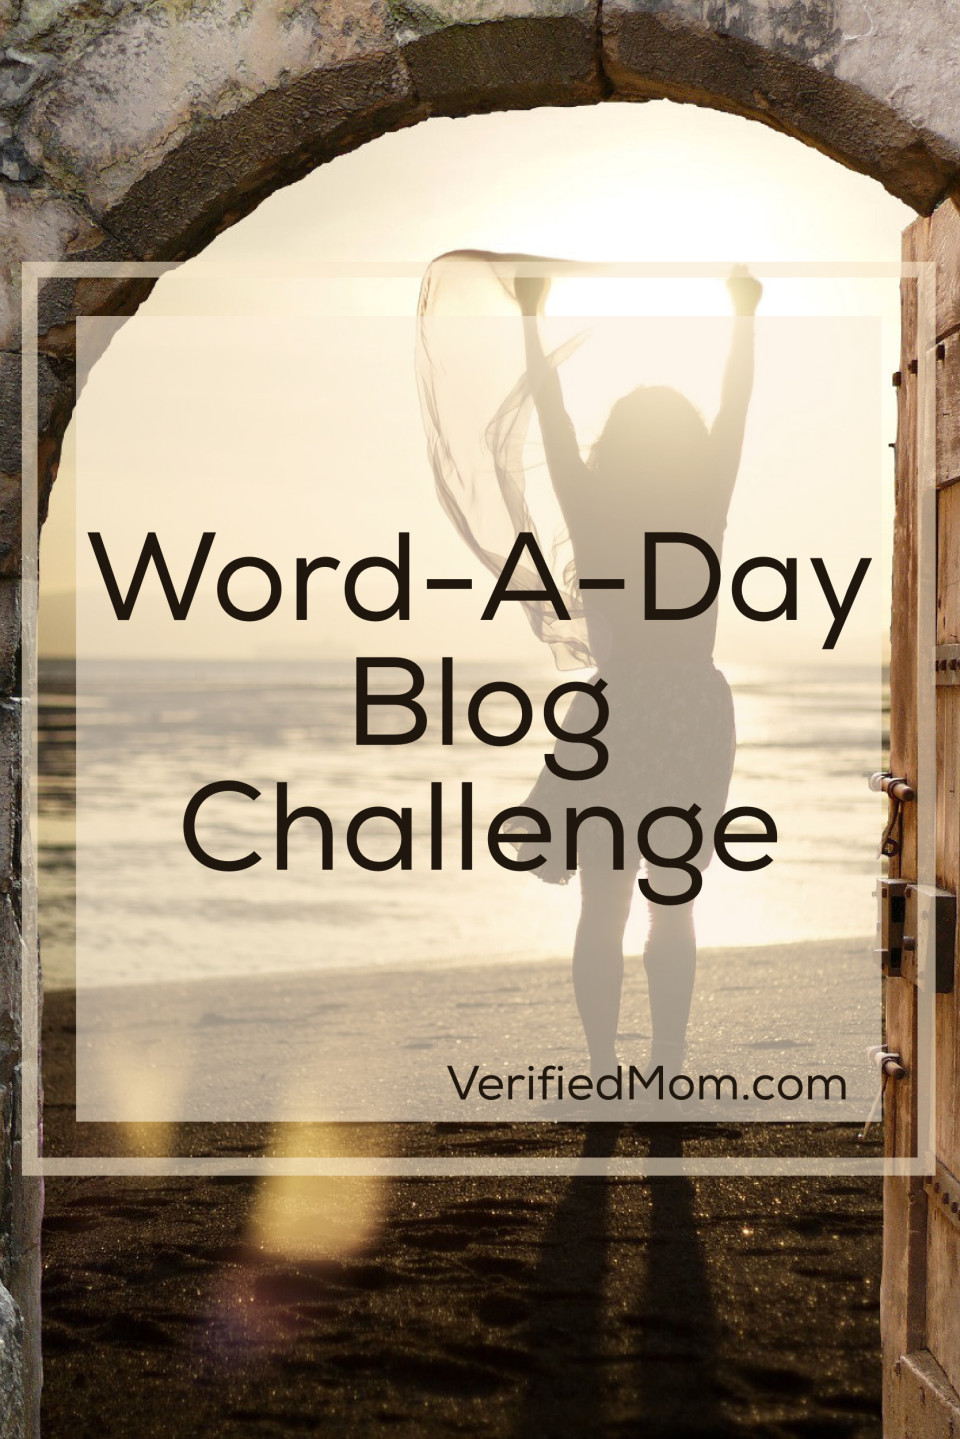 word-a-day blog challenge